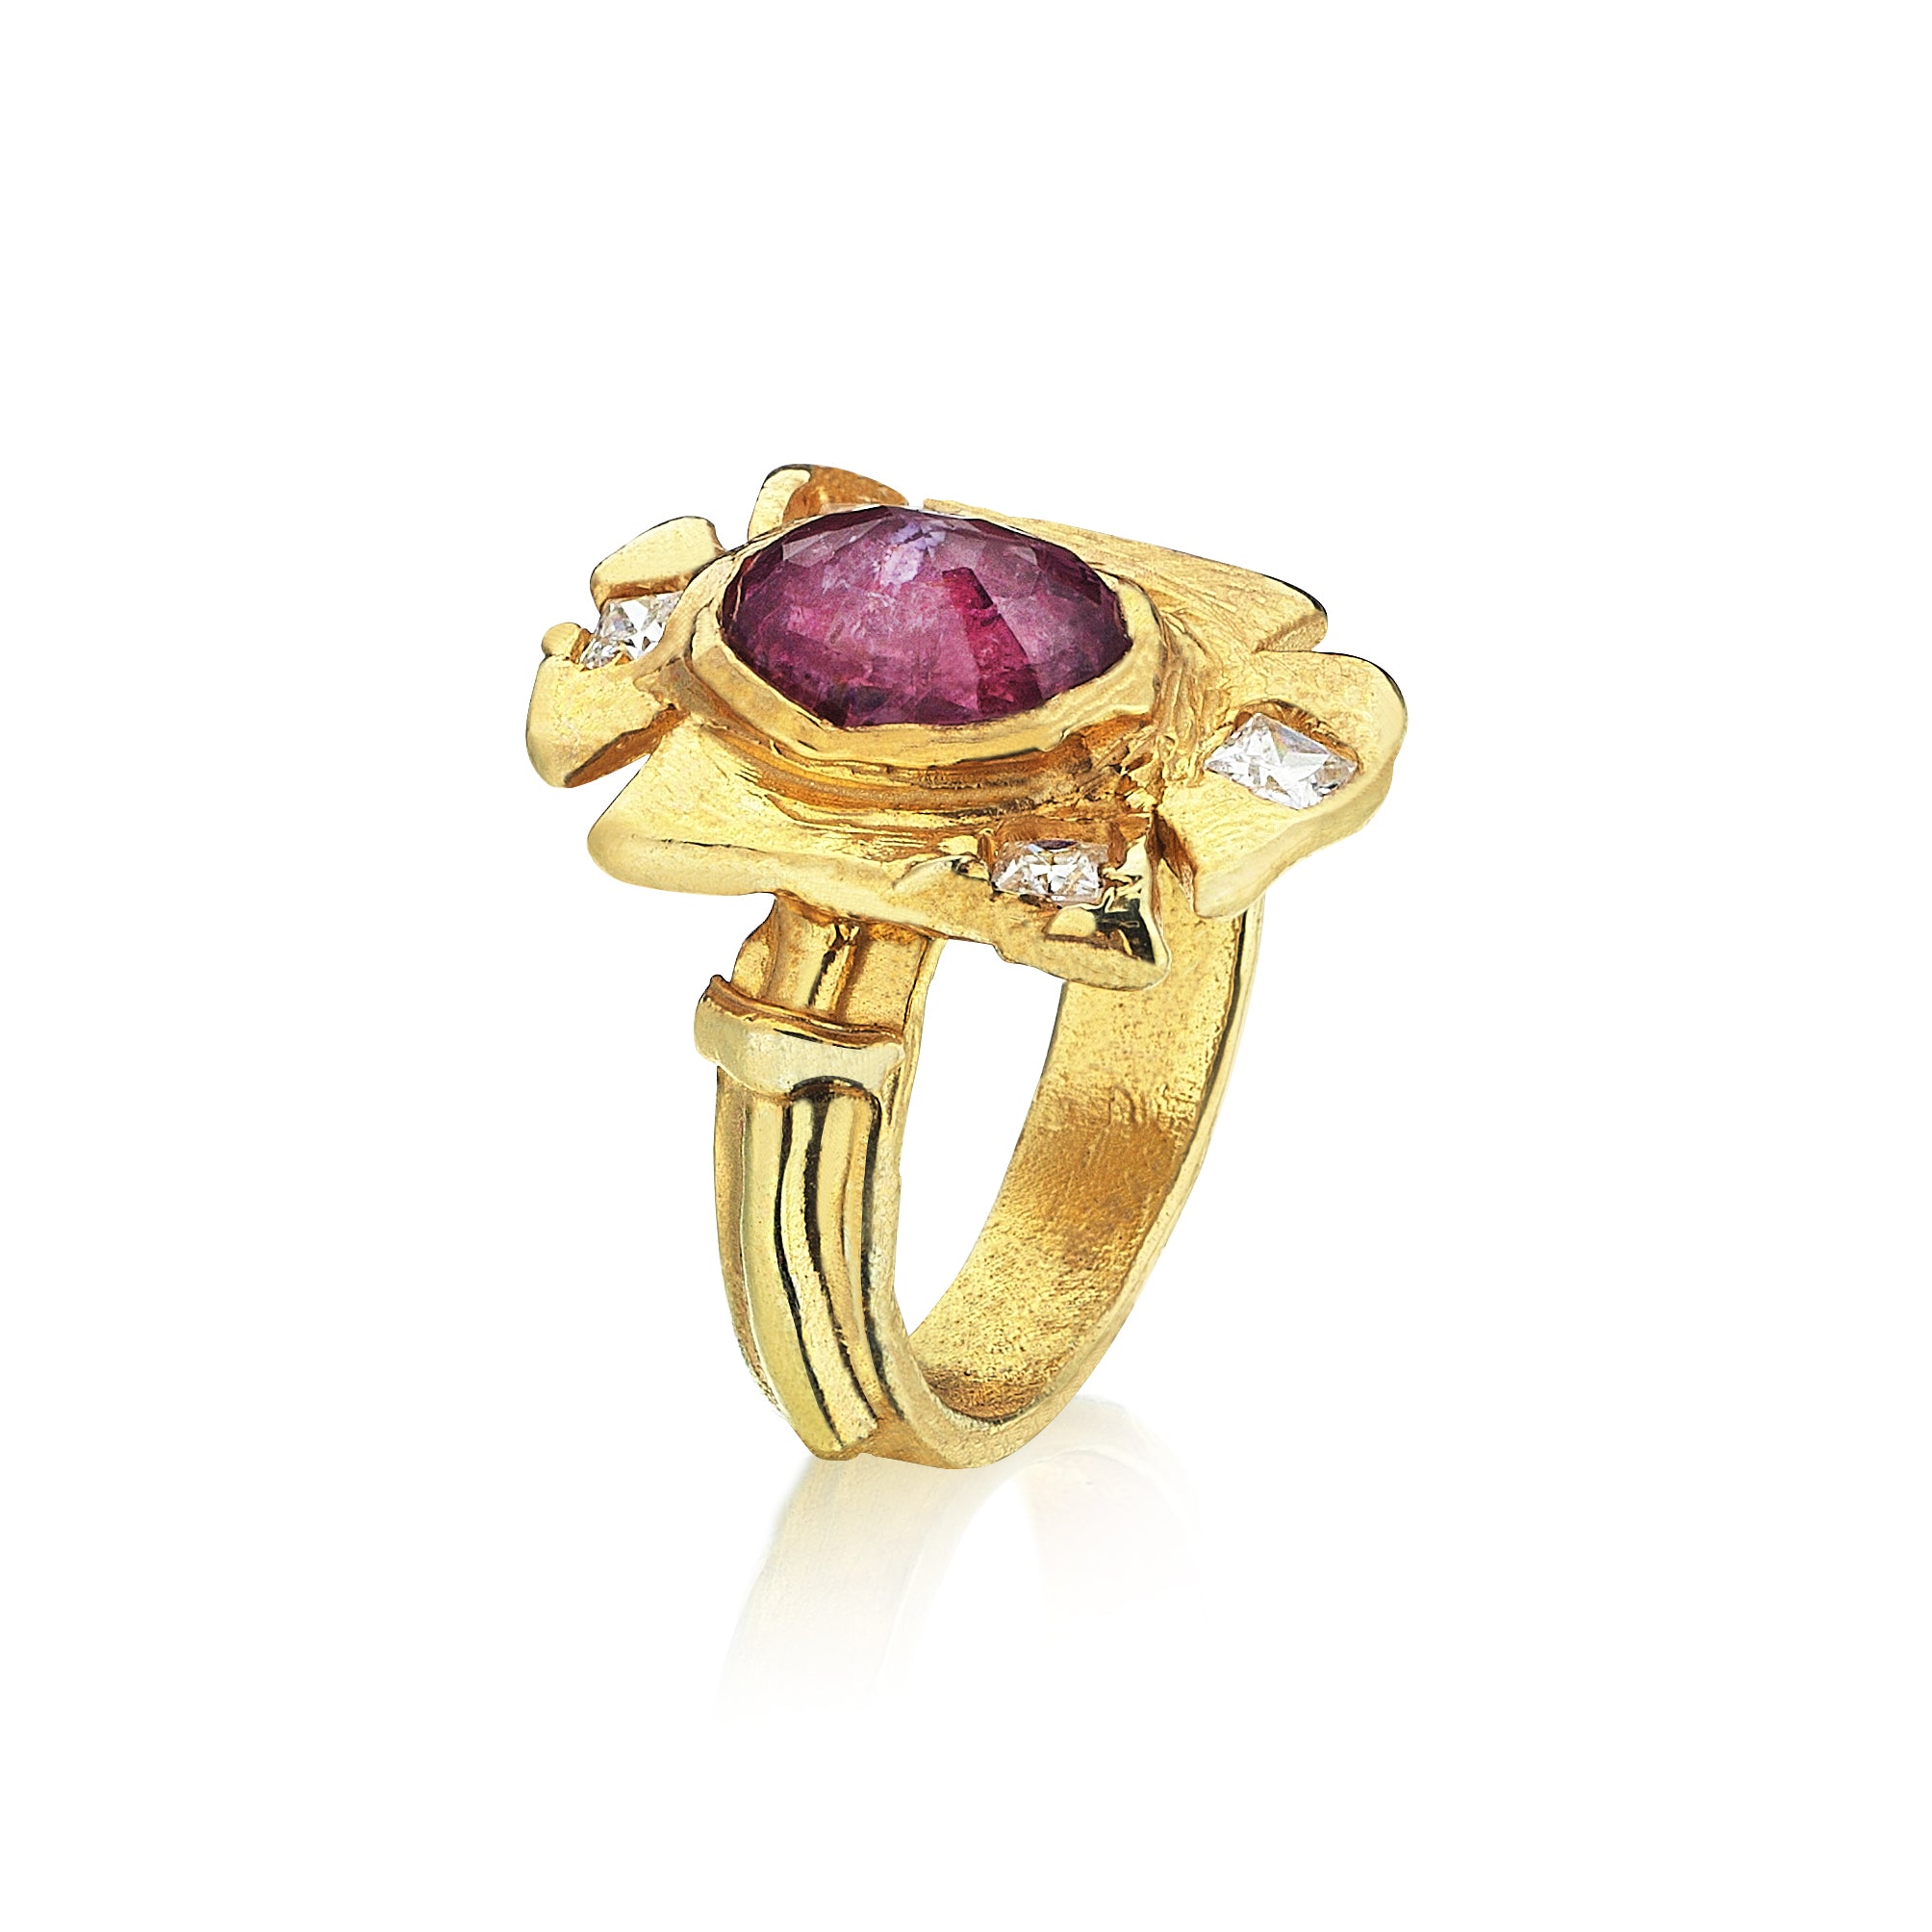 THE CLEOPATRA RING